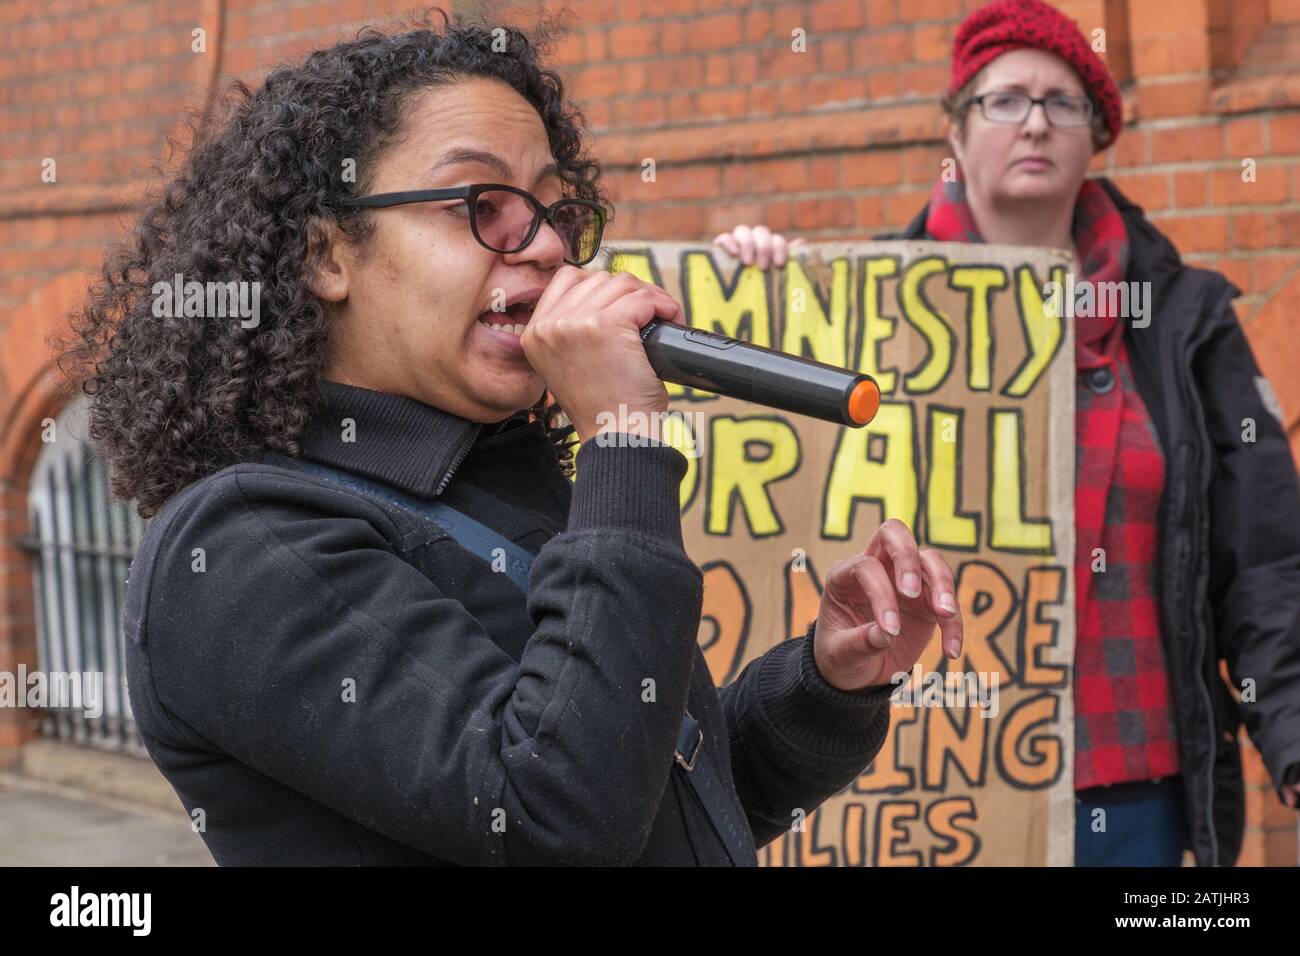 London, UK. 3rd February 2020. Antonia Bright of Movement for Justice speaks at a protest outside the Jamaican High Commission demanding Jamaica end accepting Britain's racist deportation flights. They say these are a modern equivalent of slave ships, with deportees manacled between guards for the flight. Those seized include many from Windrush families who have lived here most of their lives but are unable to produce the exhaustive paperwork demanded and seldom have the chance to properly contest their case. Peter Marshall/Alamy Live News Stock Photo